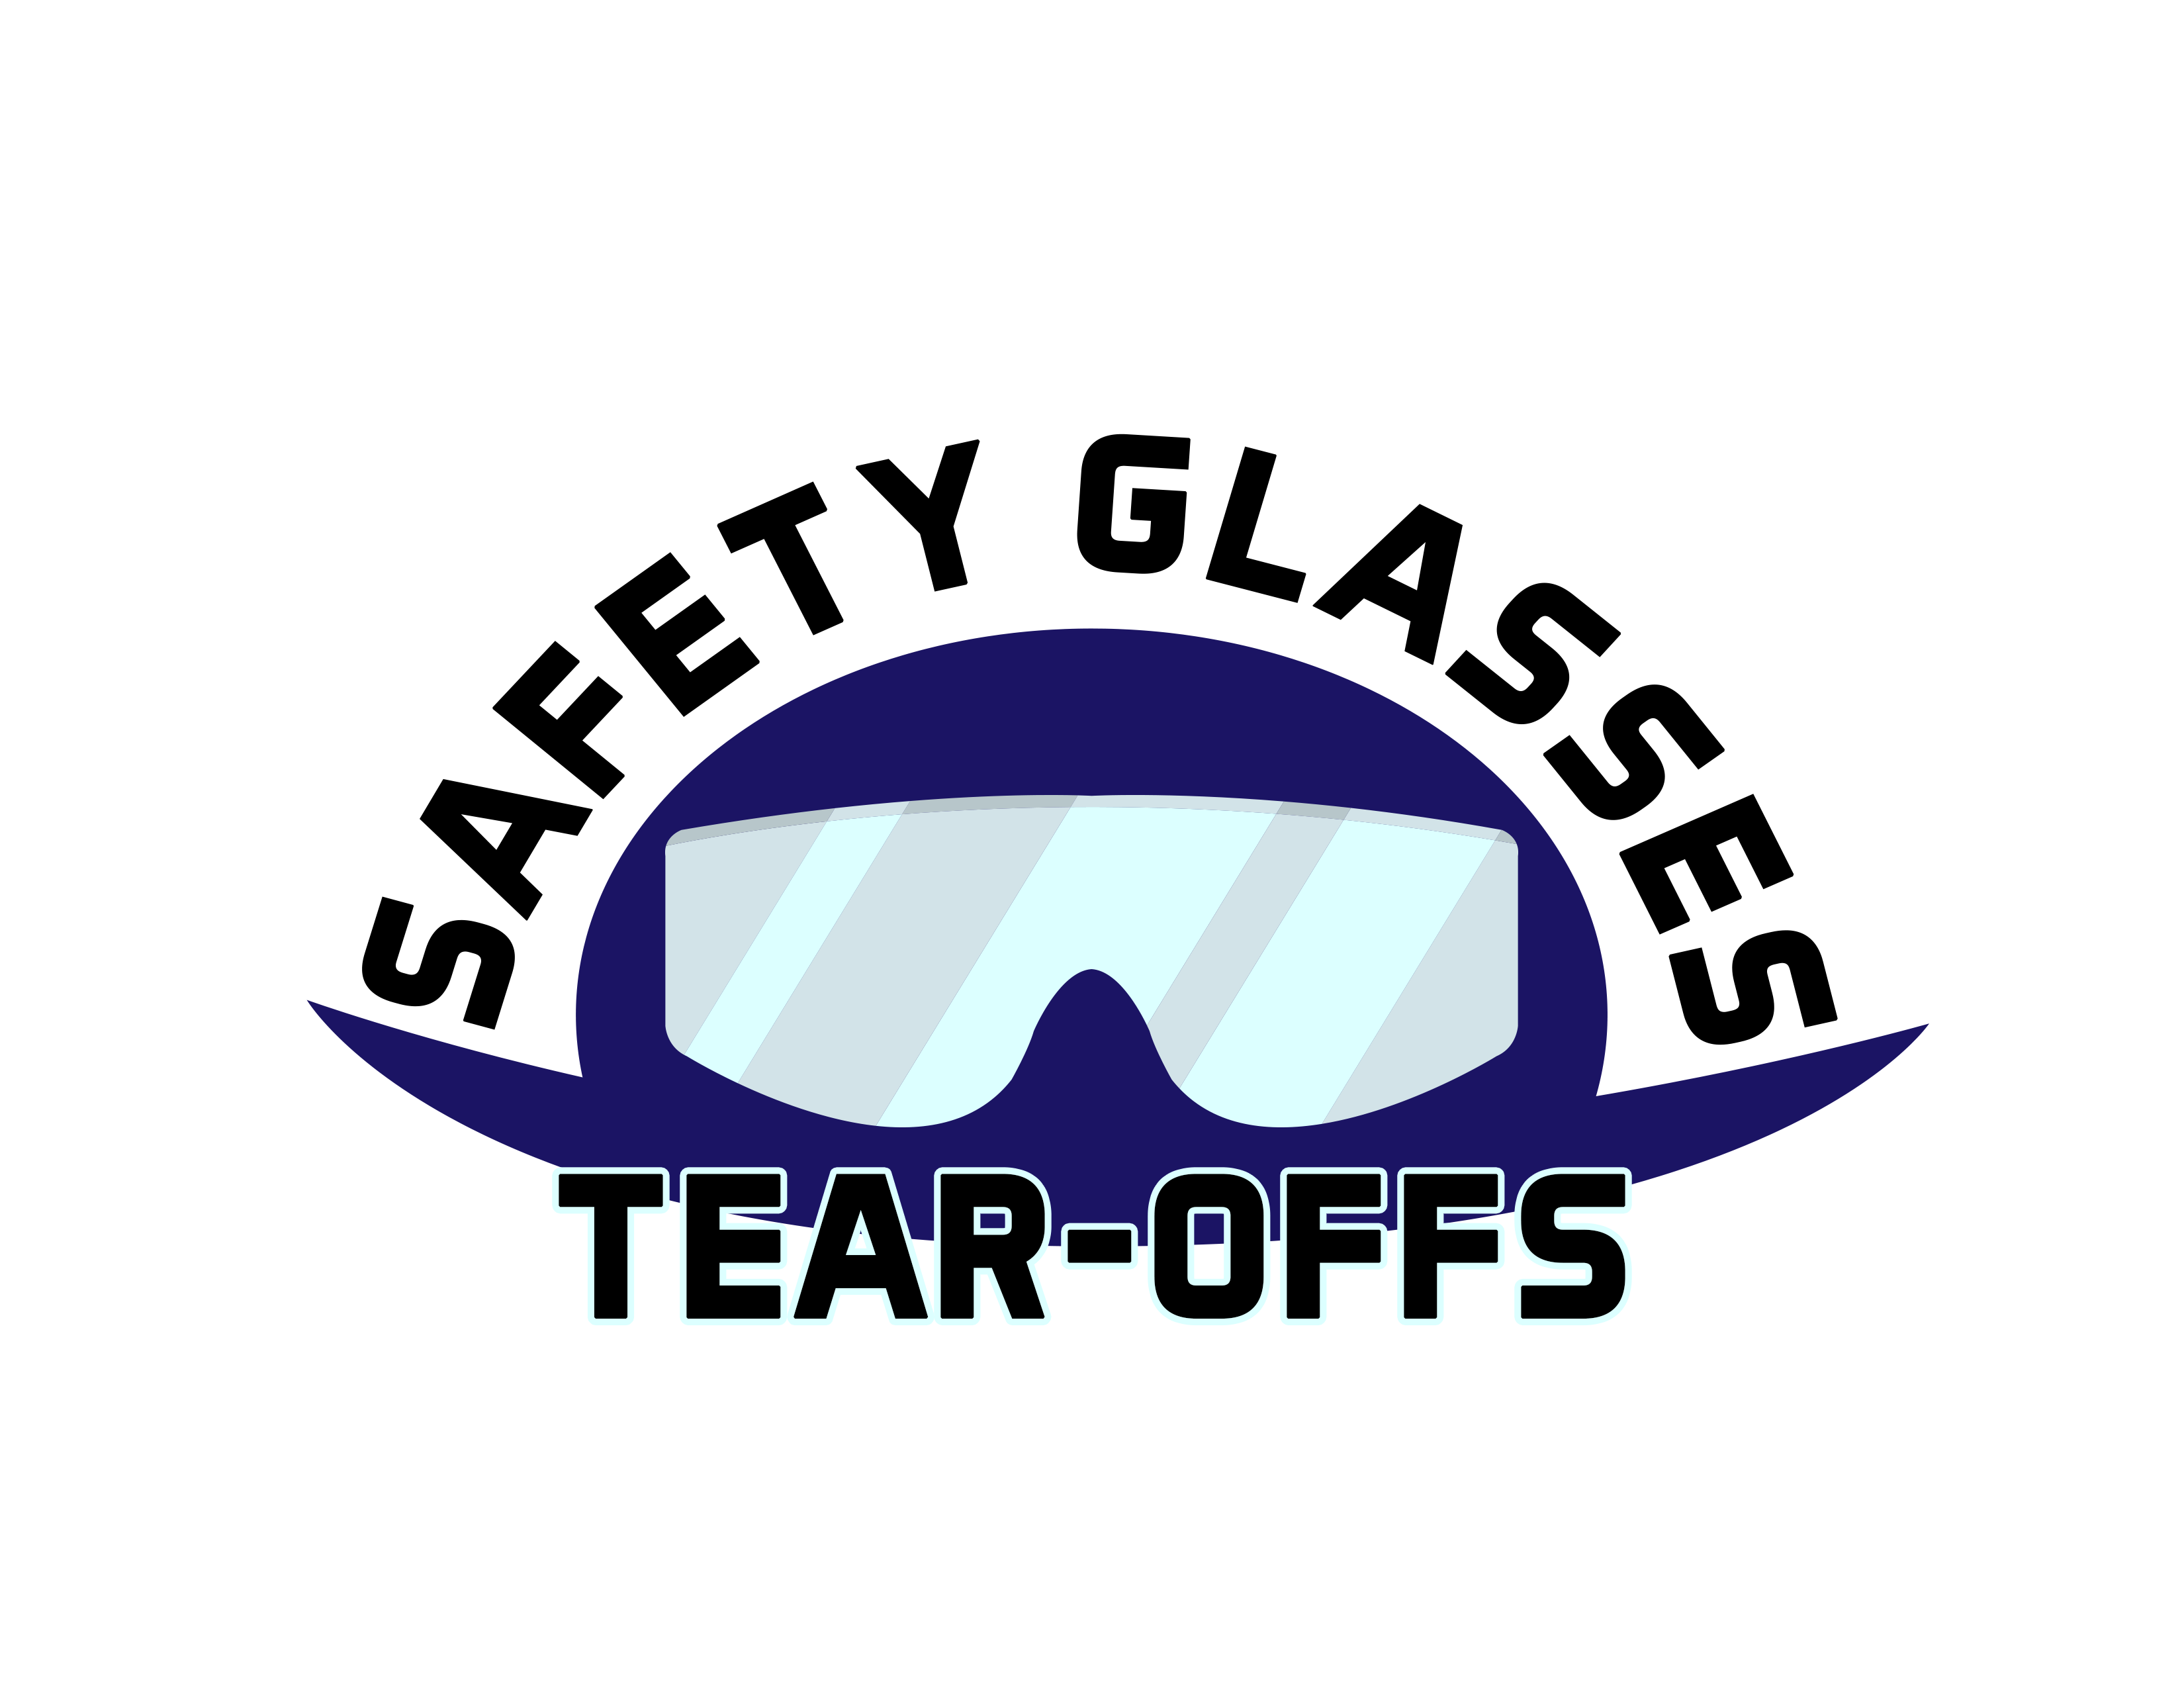 This ensures that the Safety Glass Tear-Offs will remain clear and visible for much longer.